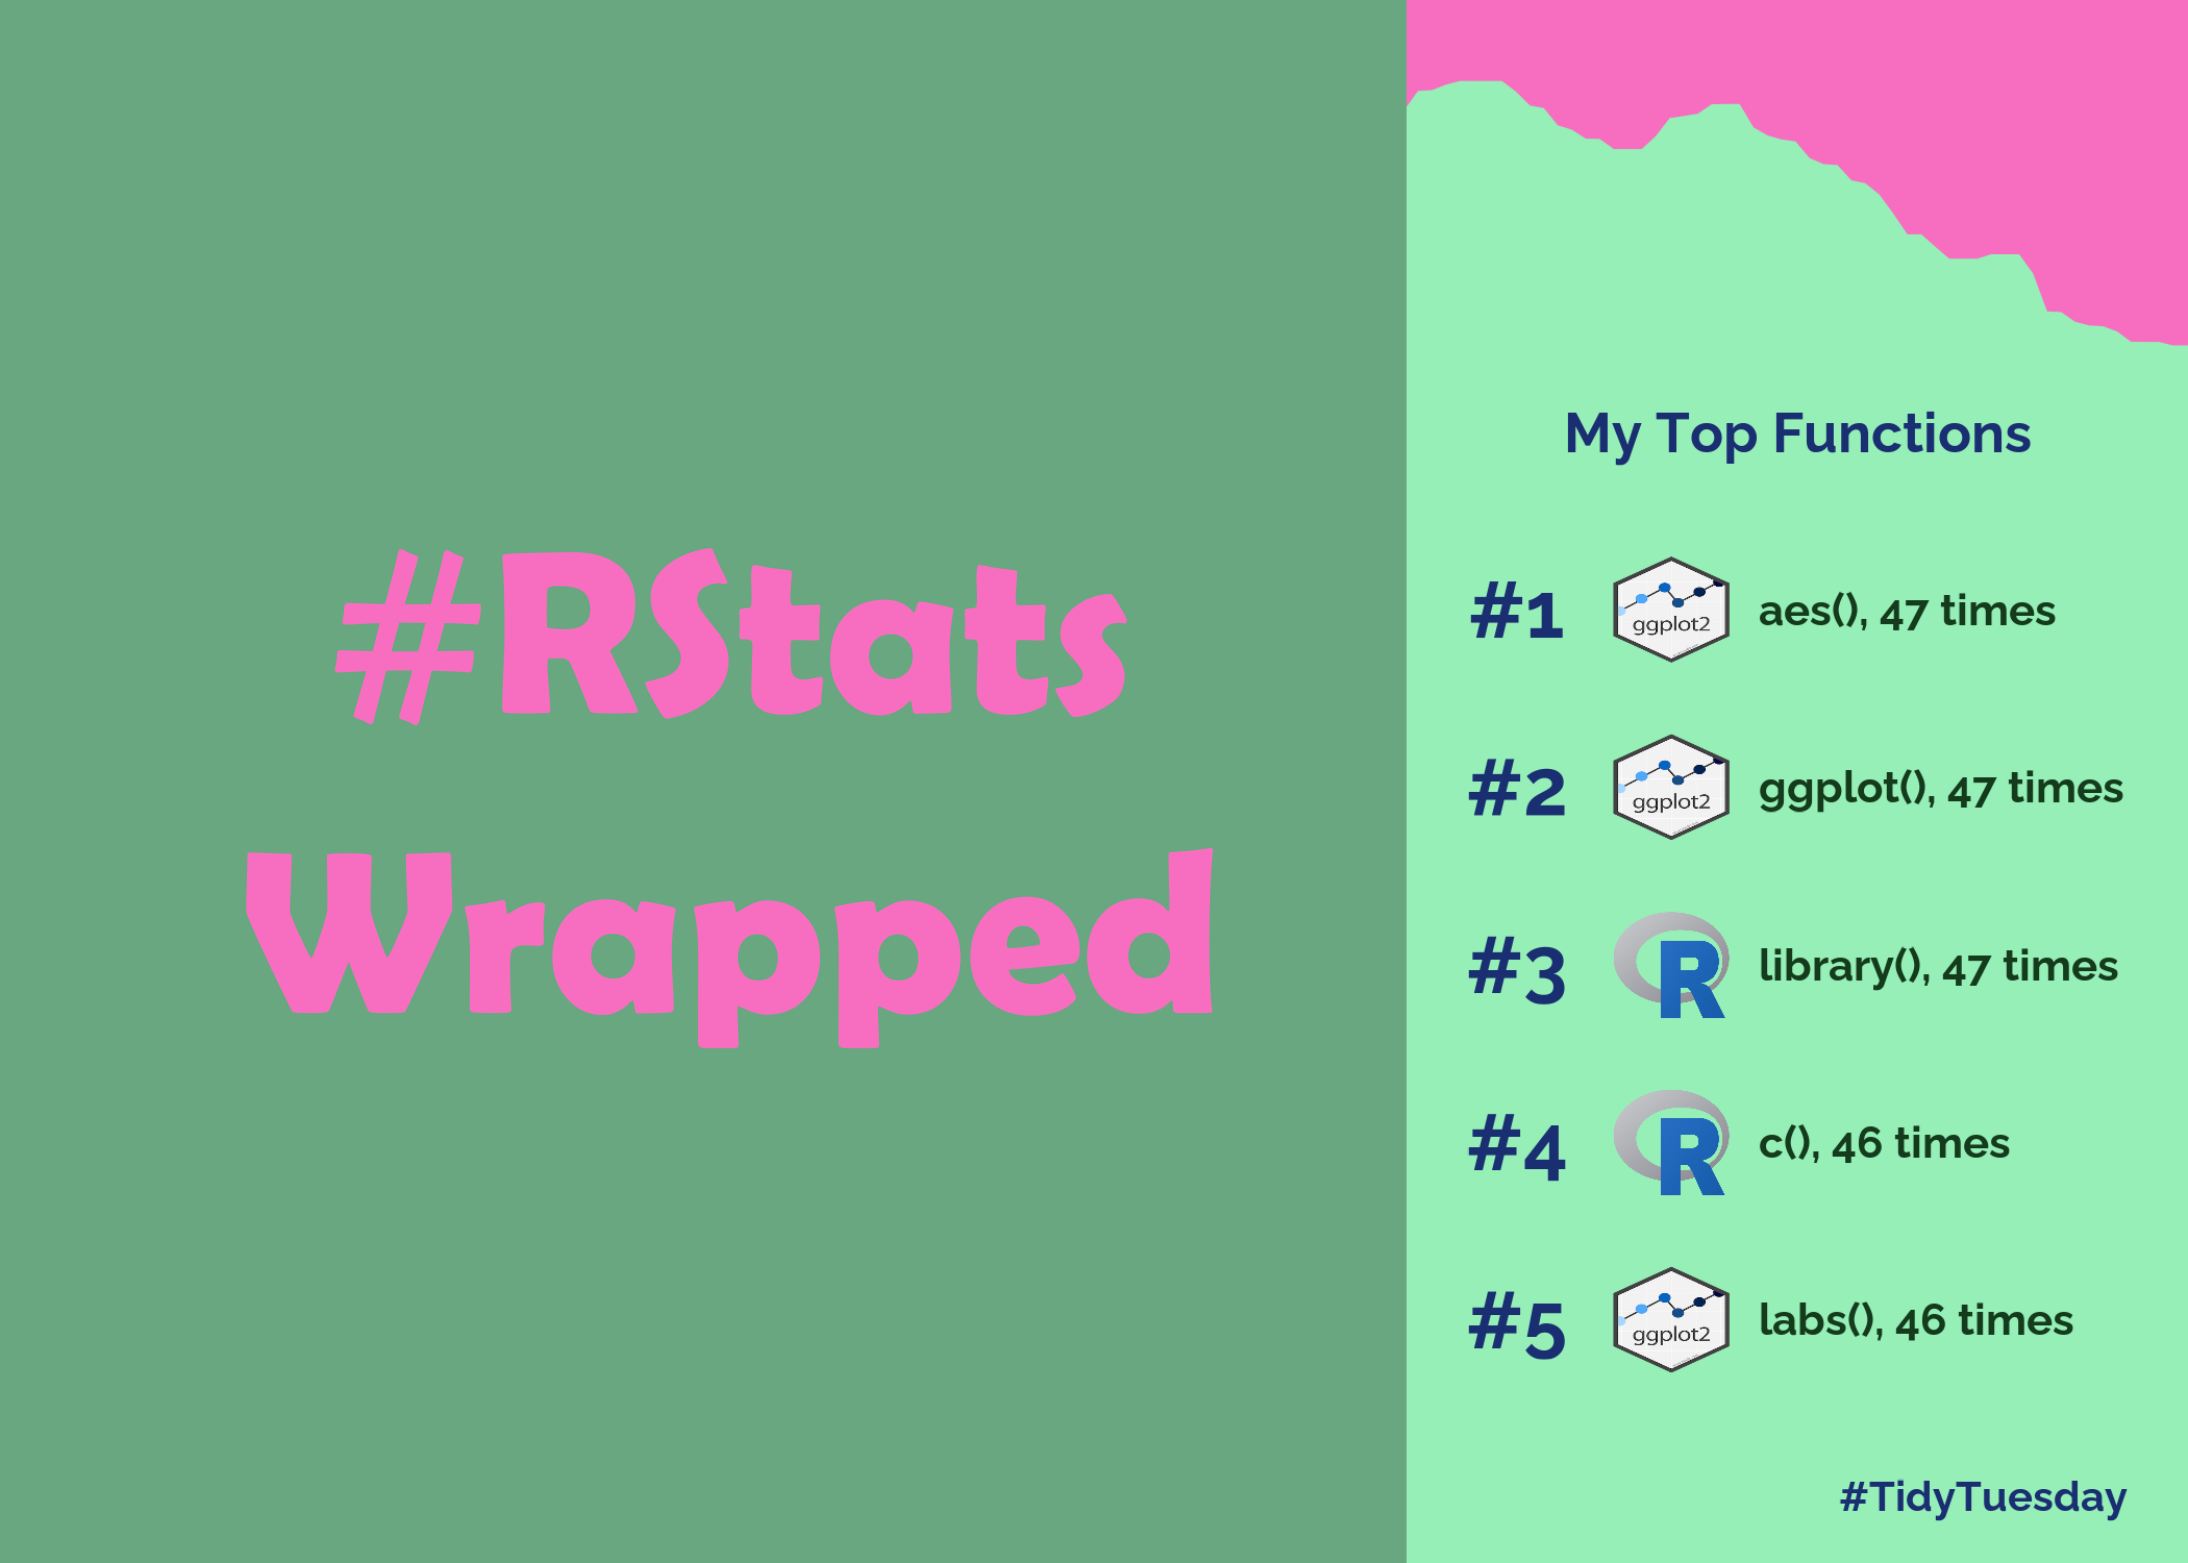 A graphic showing my top 5 most used functions during this year's TidyTuesday contributions: aes, ggplot, library, c, labs, in the style of spotify wrapped graphics onthe right. On the left a green rectangle with rstats wrapped written in pink 